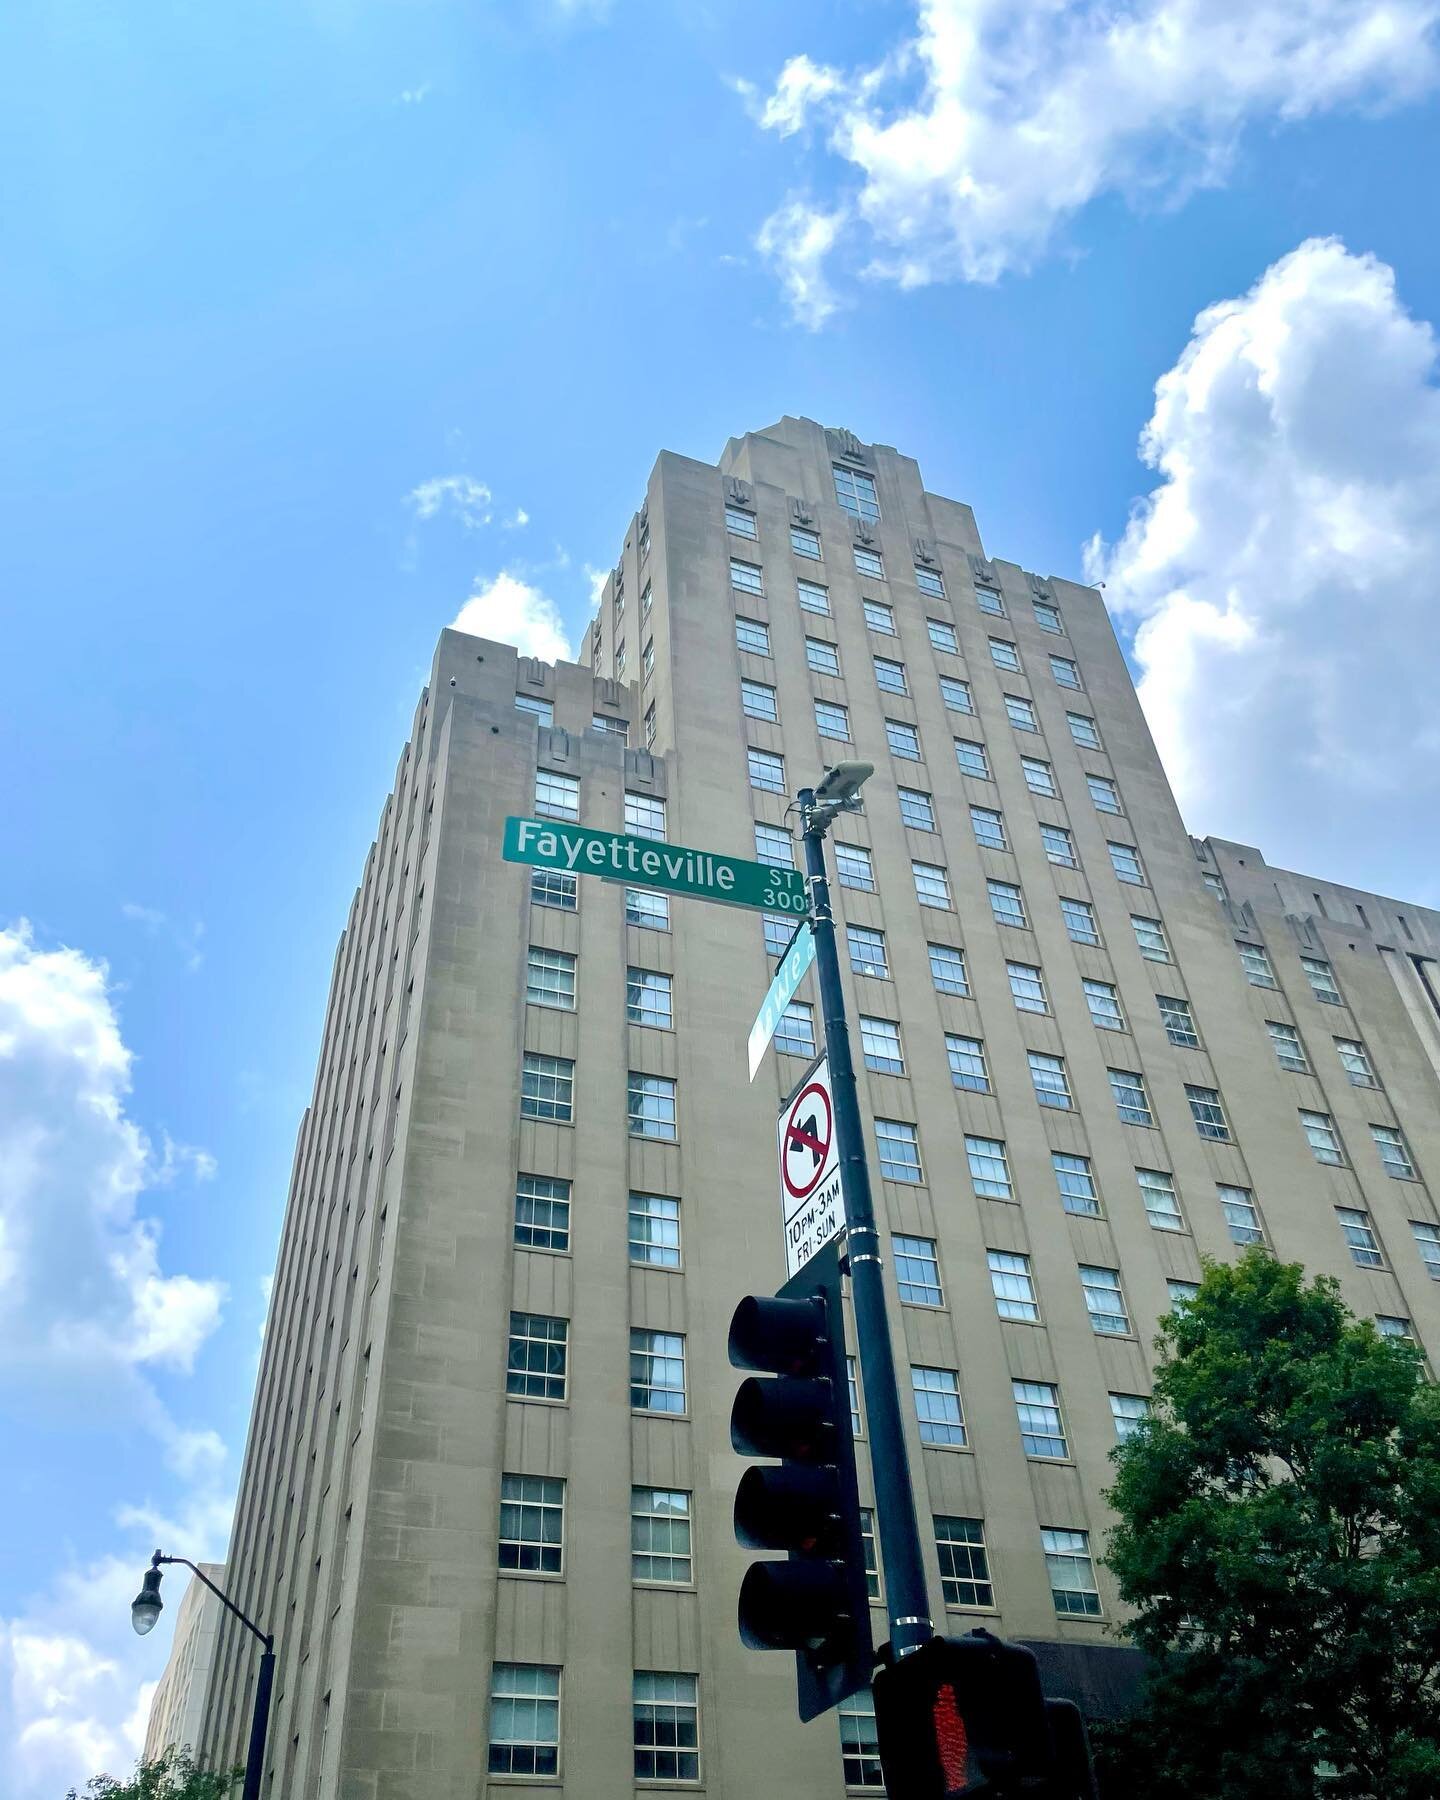 This is our street, this is our city, this is our home ❤️ 

#fayettevillestreet #downtownraleigh #raleighnc #homesweethome #ourcity #raleighisgrowing #raleighisourhome #weloveraleigh #downtownraleighnc #dtr #dtraleigh #raleigh #supportlocalbusinesses